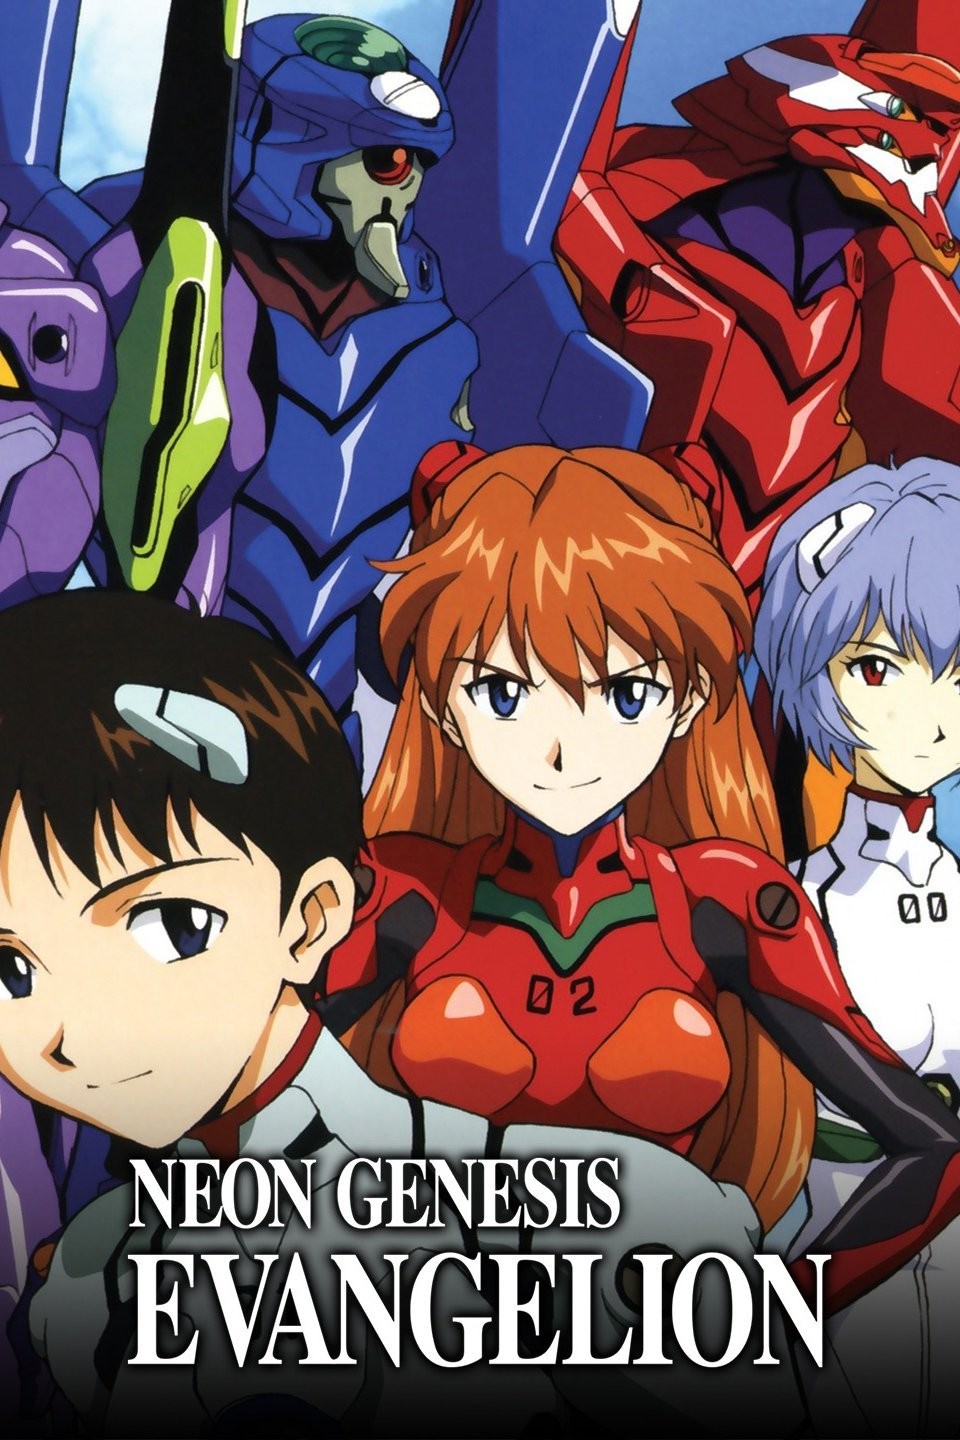 Evangelion: Most Disturbing Things That Happen In The Anime